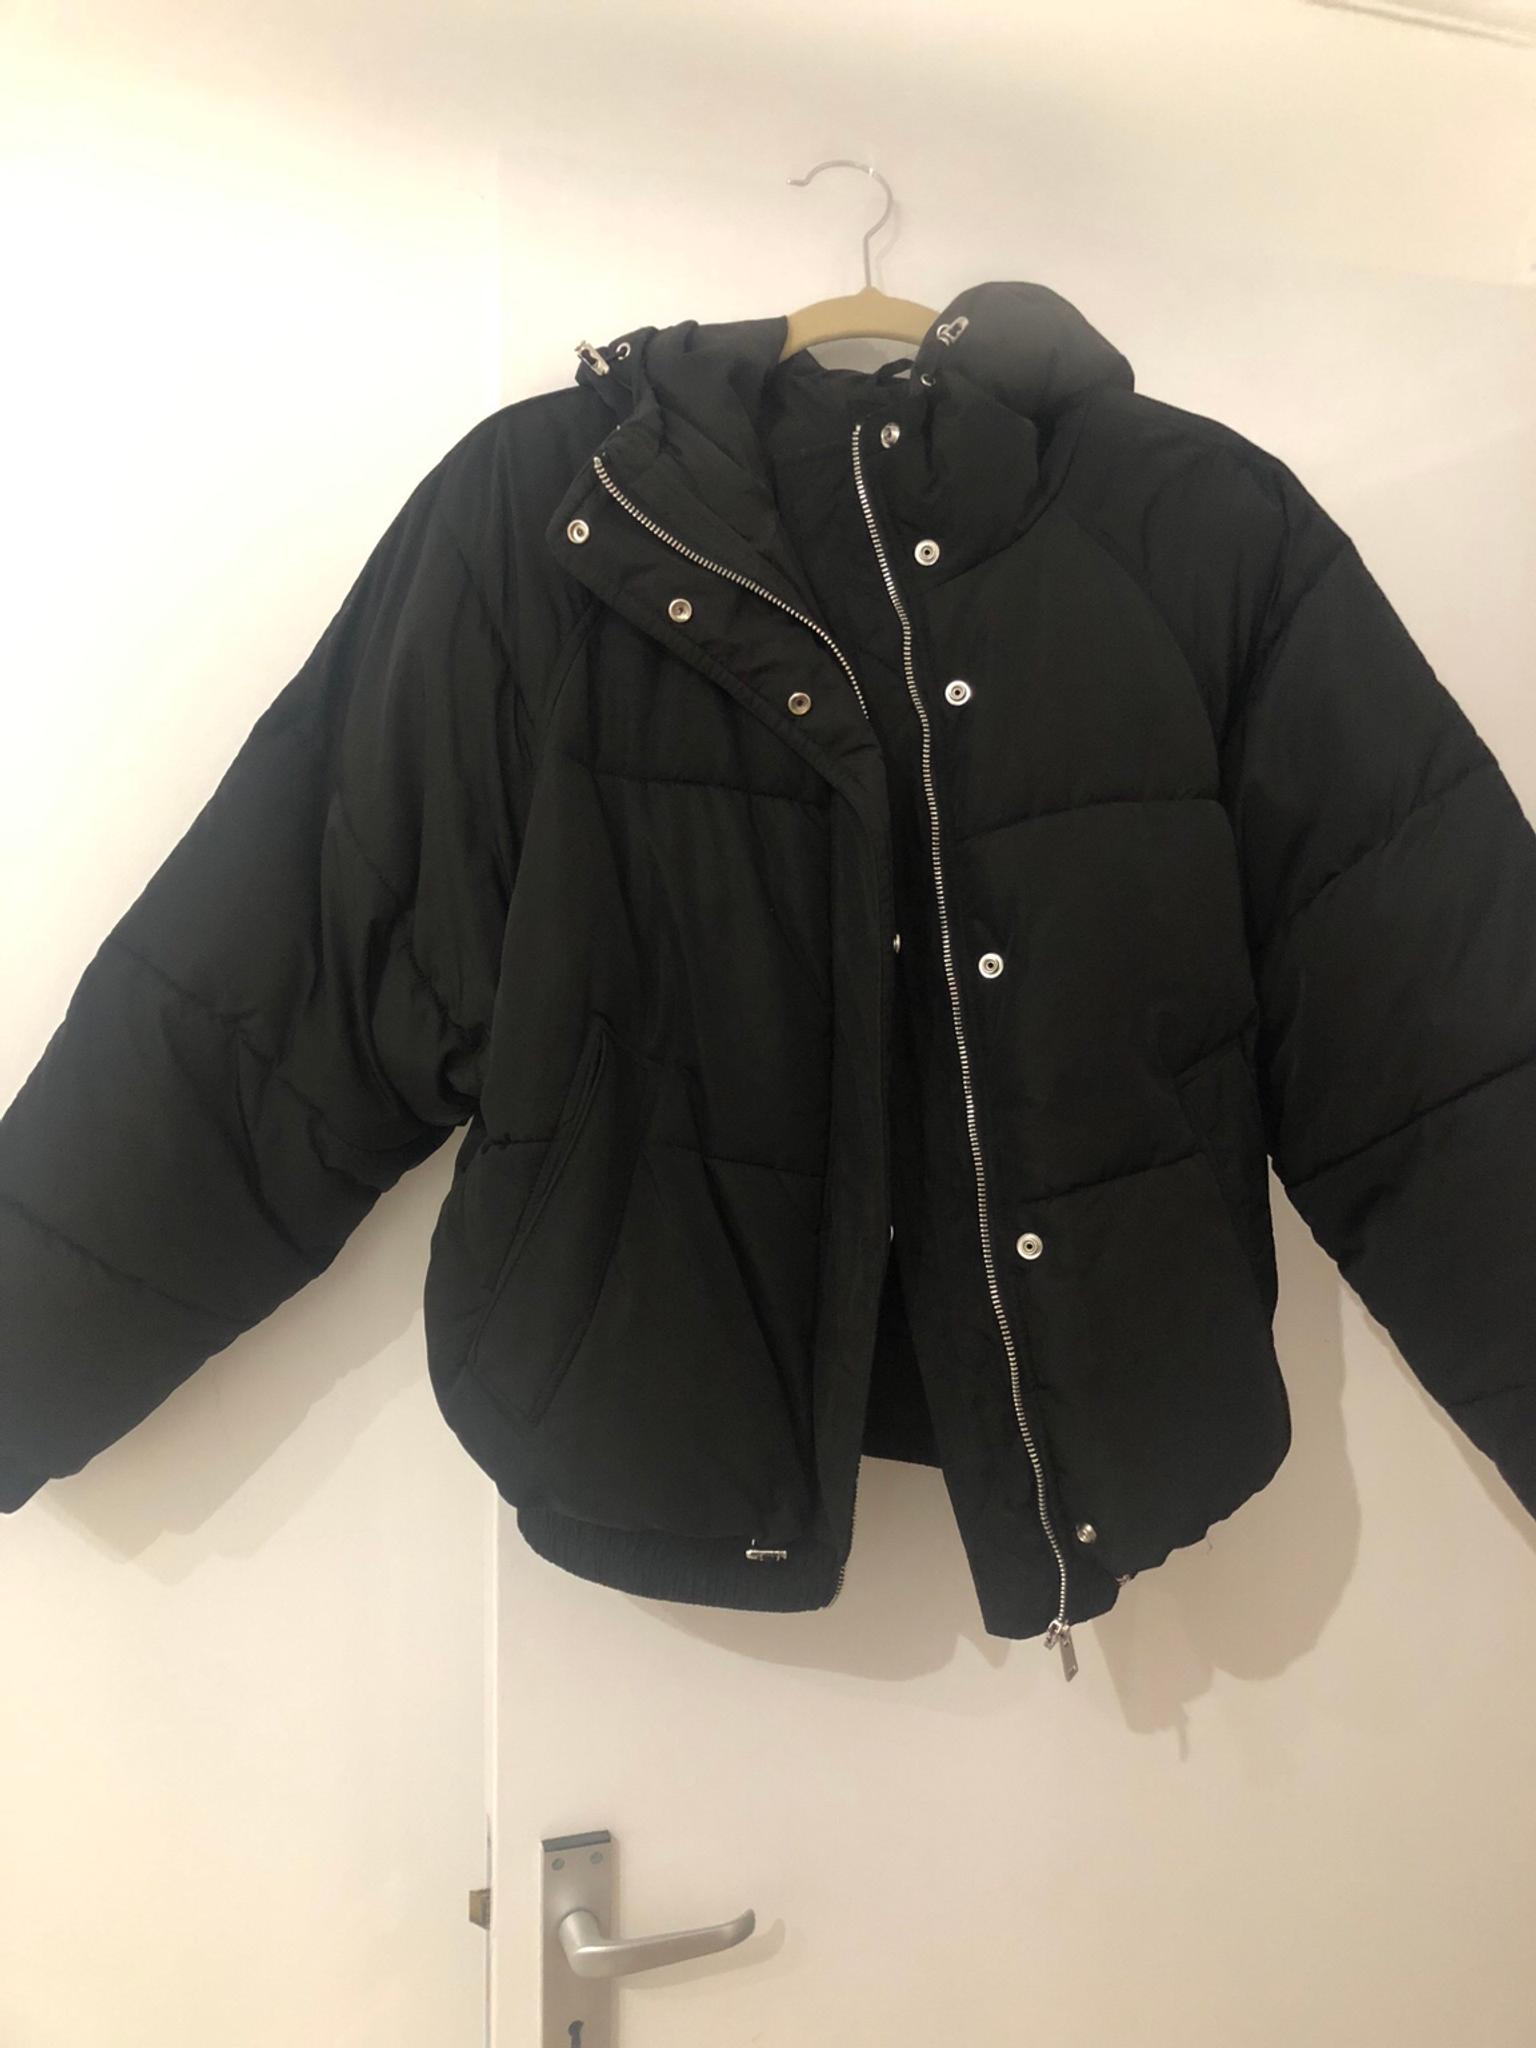 trf collection jacket